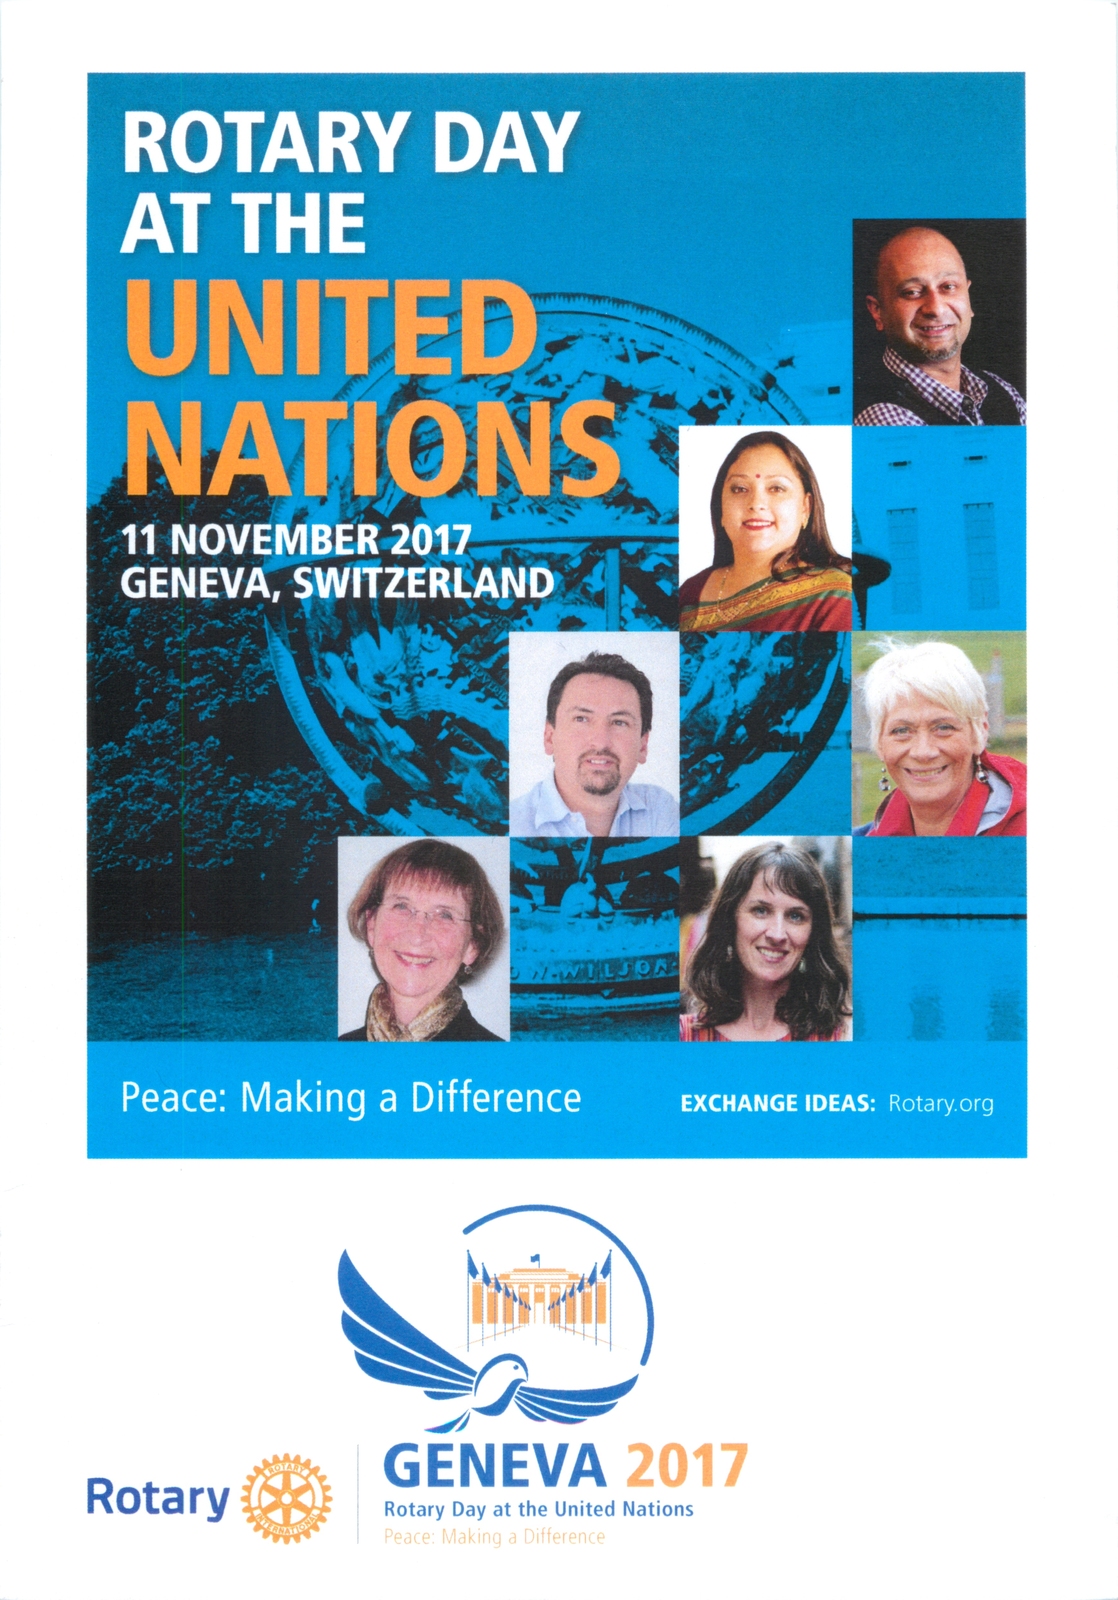 Diskussionen, Palais des Nations, UN-Rotary-Tag, UNO, Rotary Day